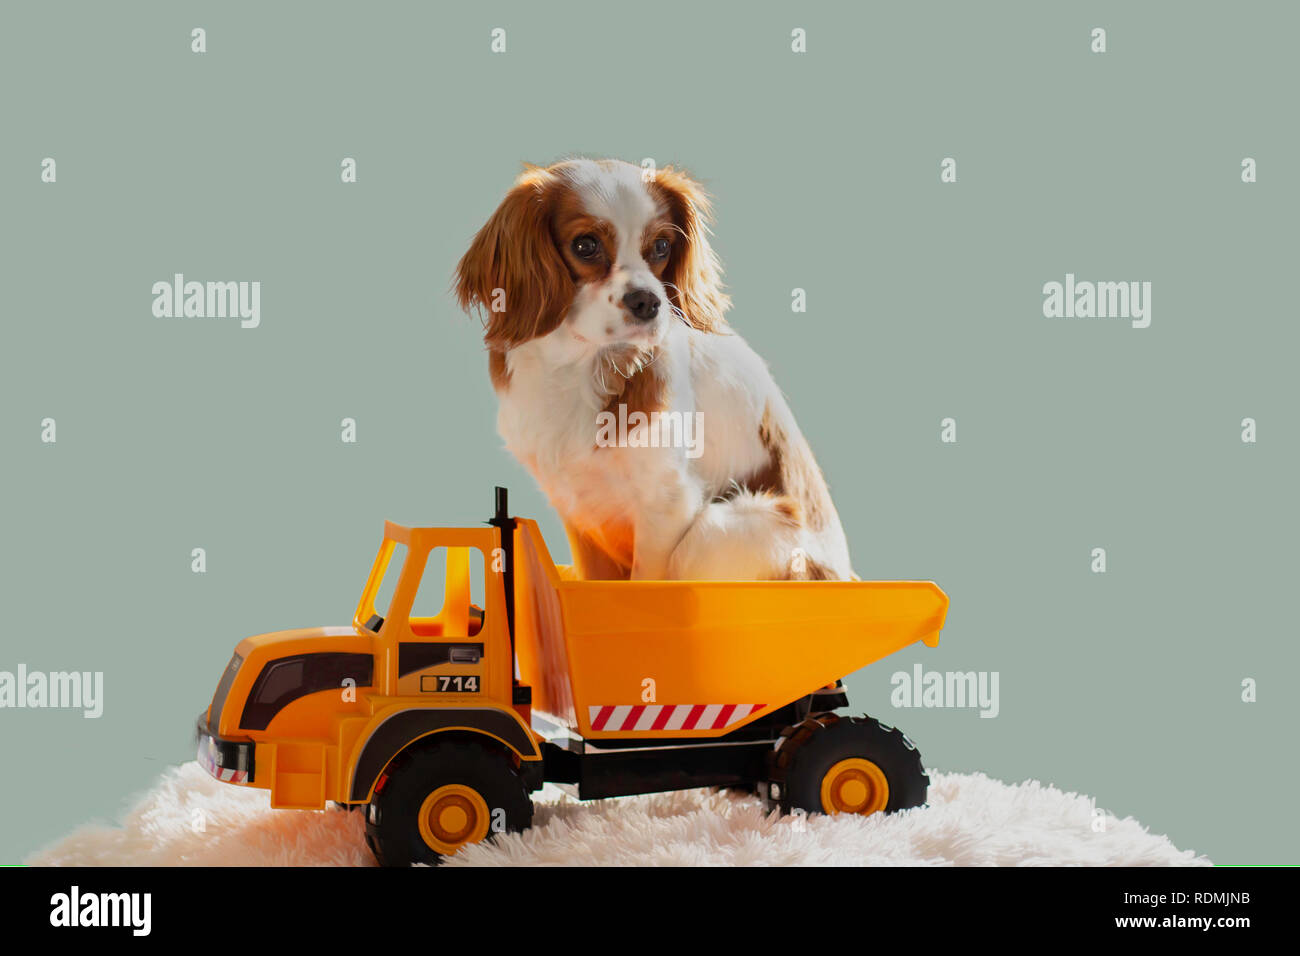 King Charles Cavalier puppy in a toy truck on isolated background Stock Photo